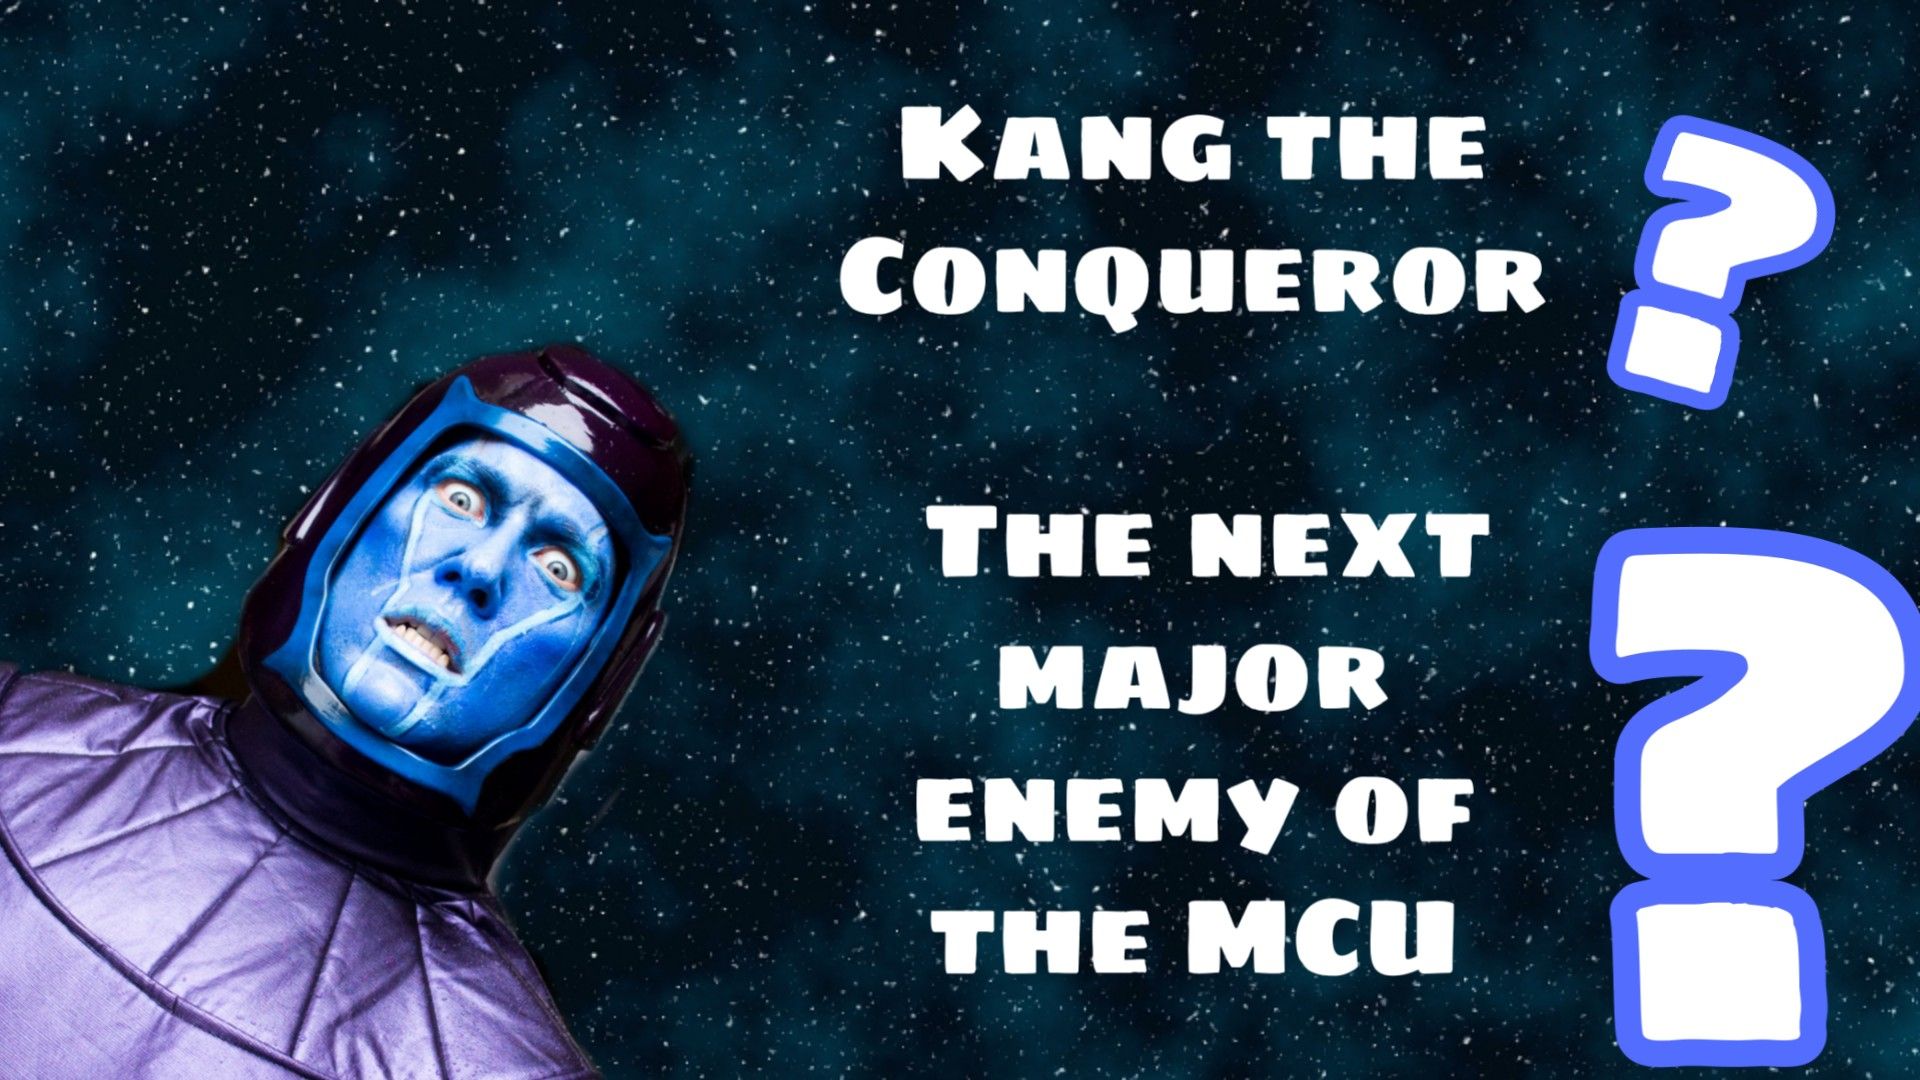 Kang the Conqueror next major enemy of the MCU (The Avengers 5)